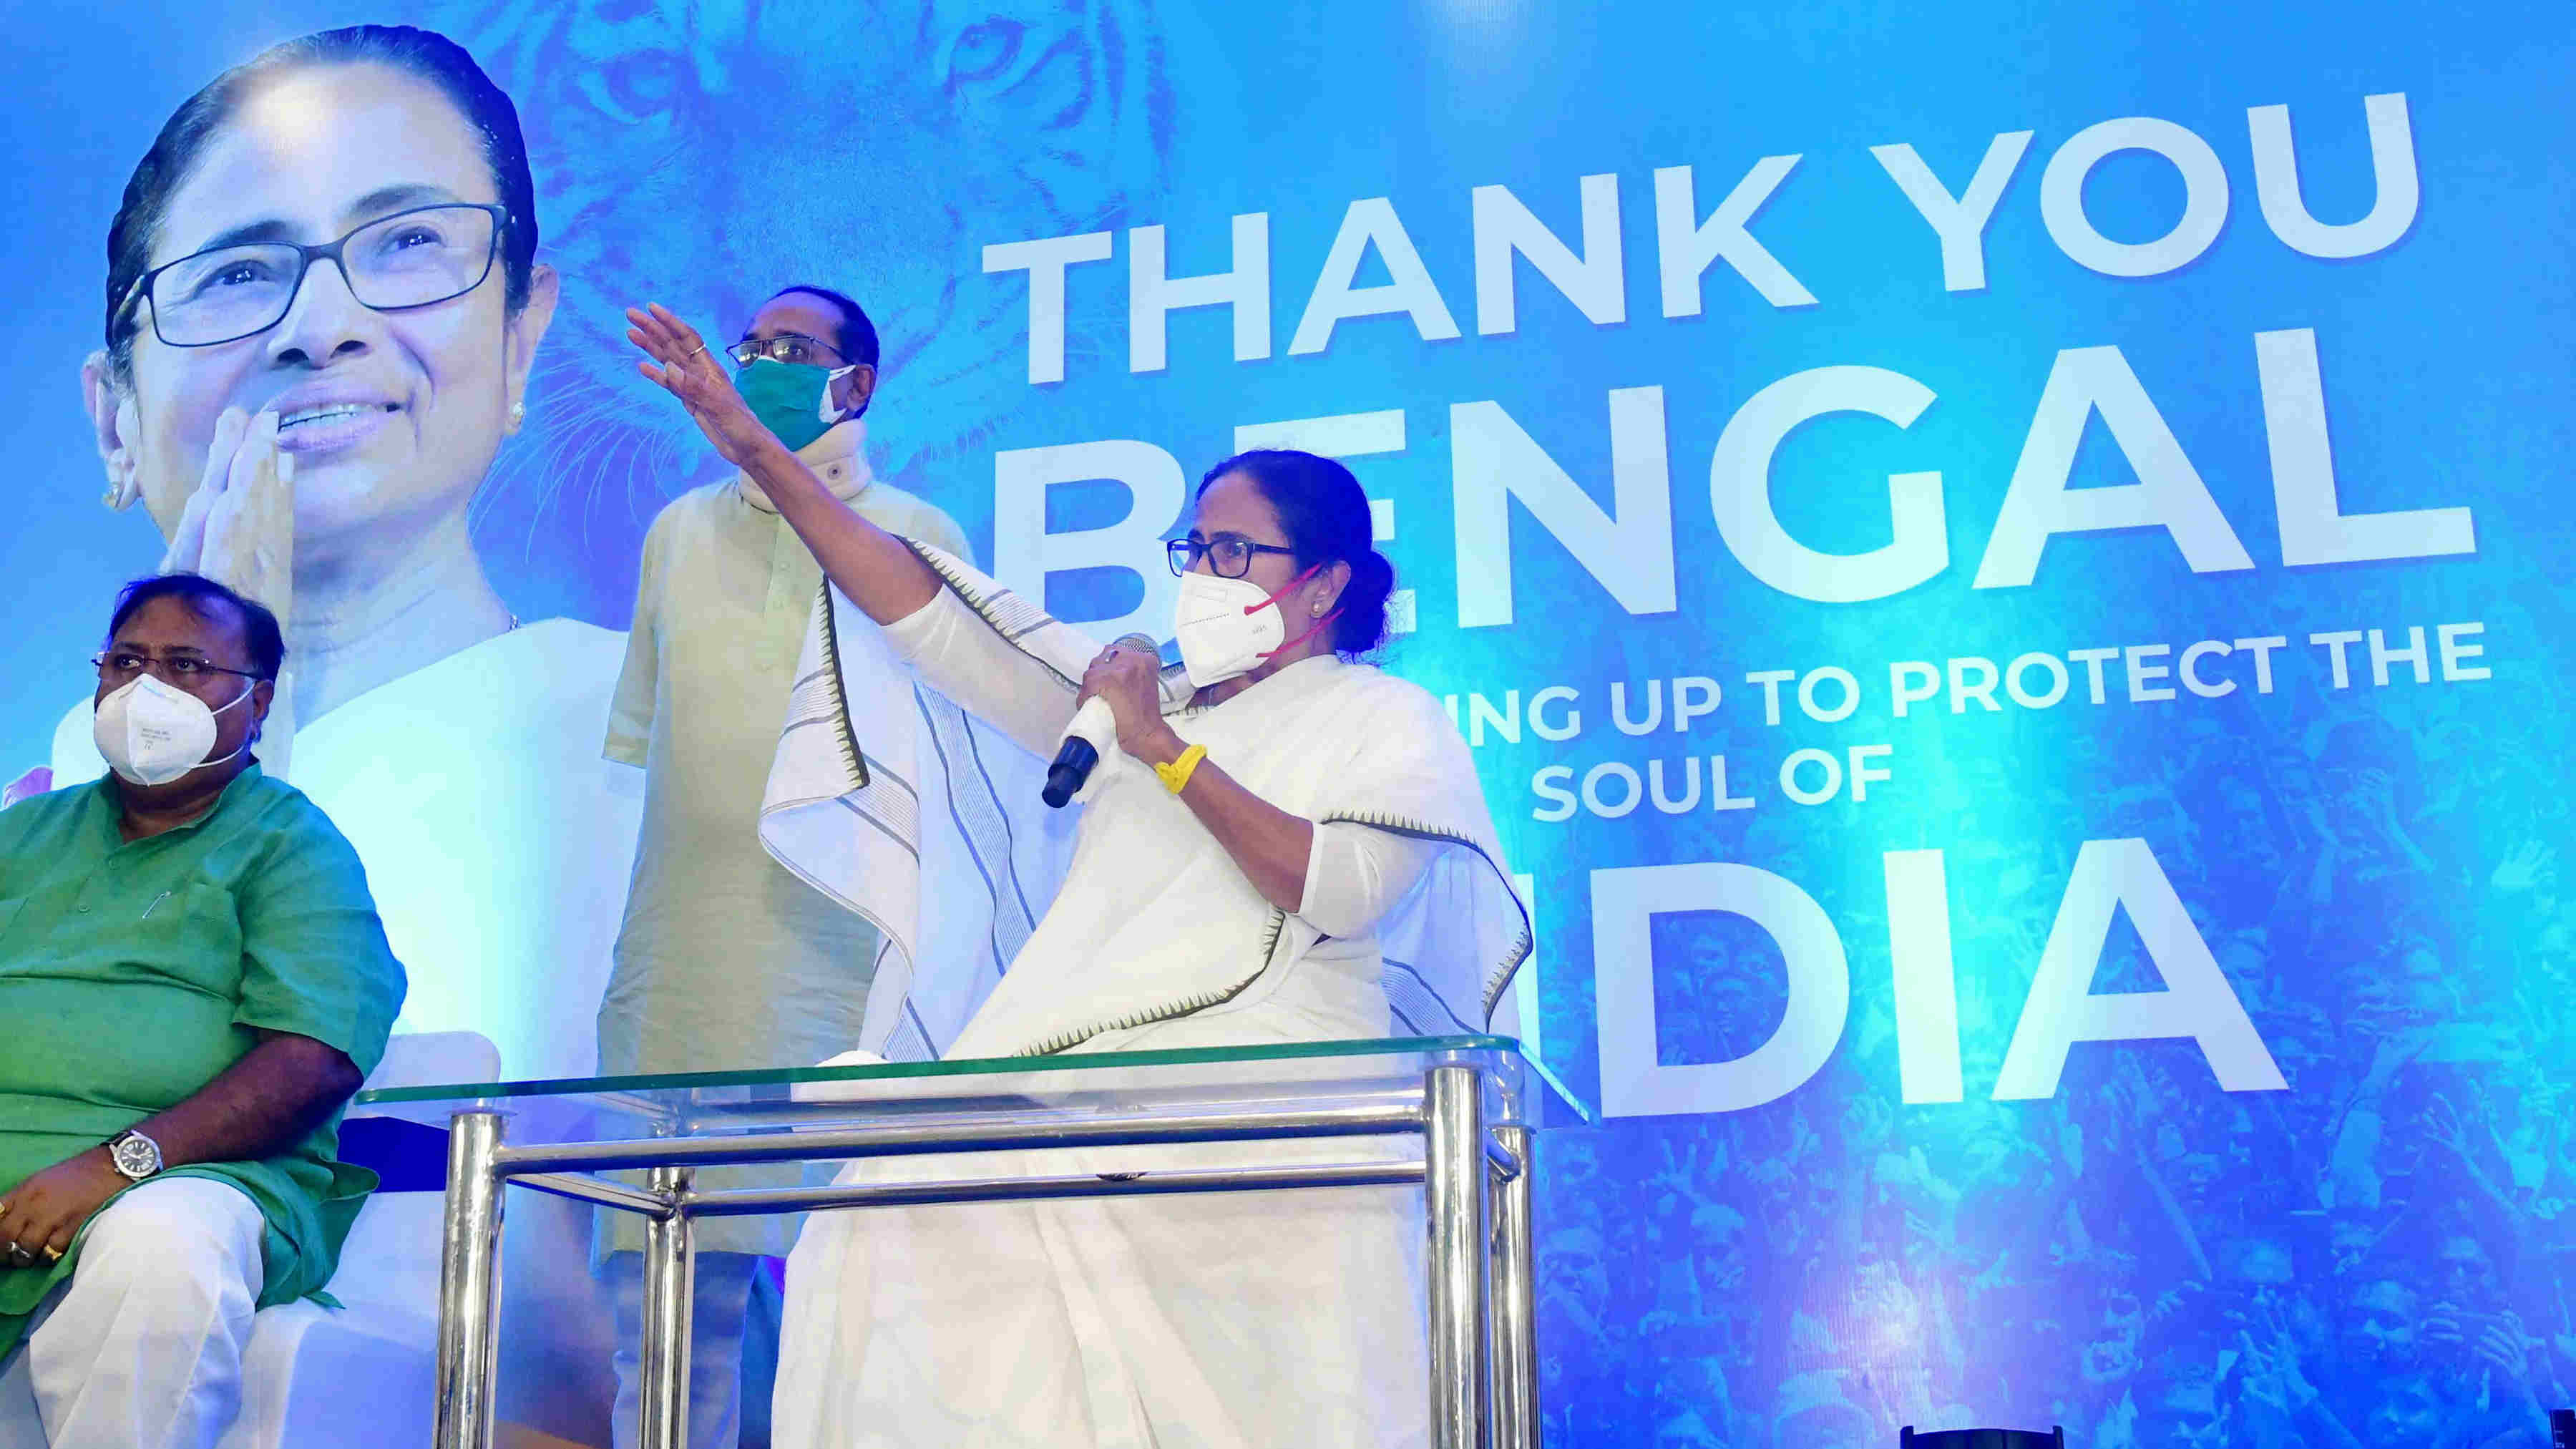 BJP's primary goal is to satisfy Adani and Ambani: Trinamool Congress -  BJP's primary goal is to satisfy Adani and Ambani: Trinamool Congress -